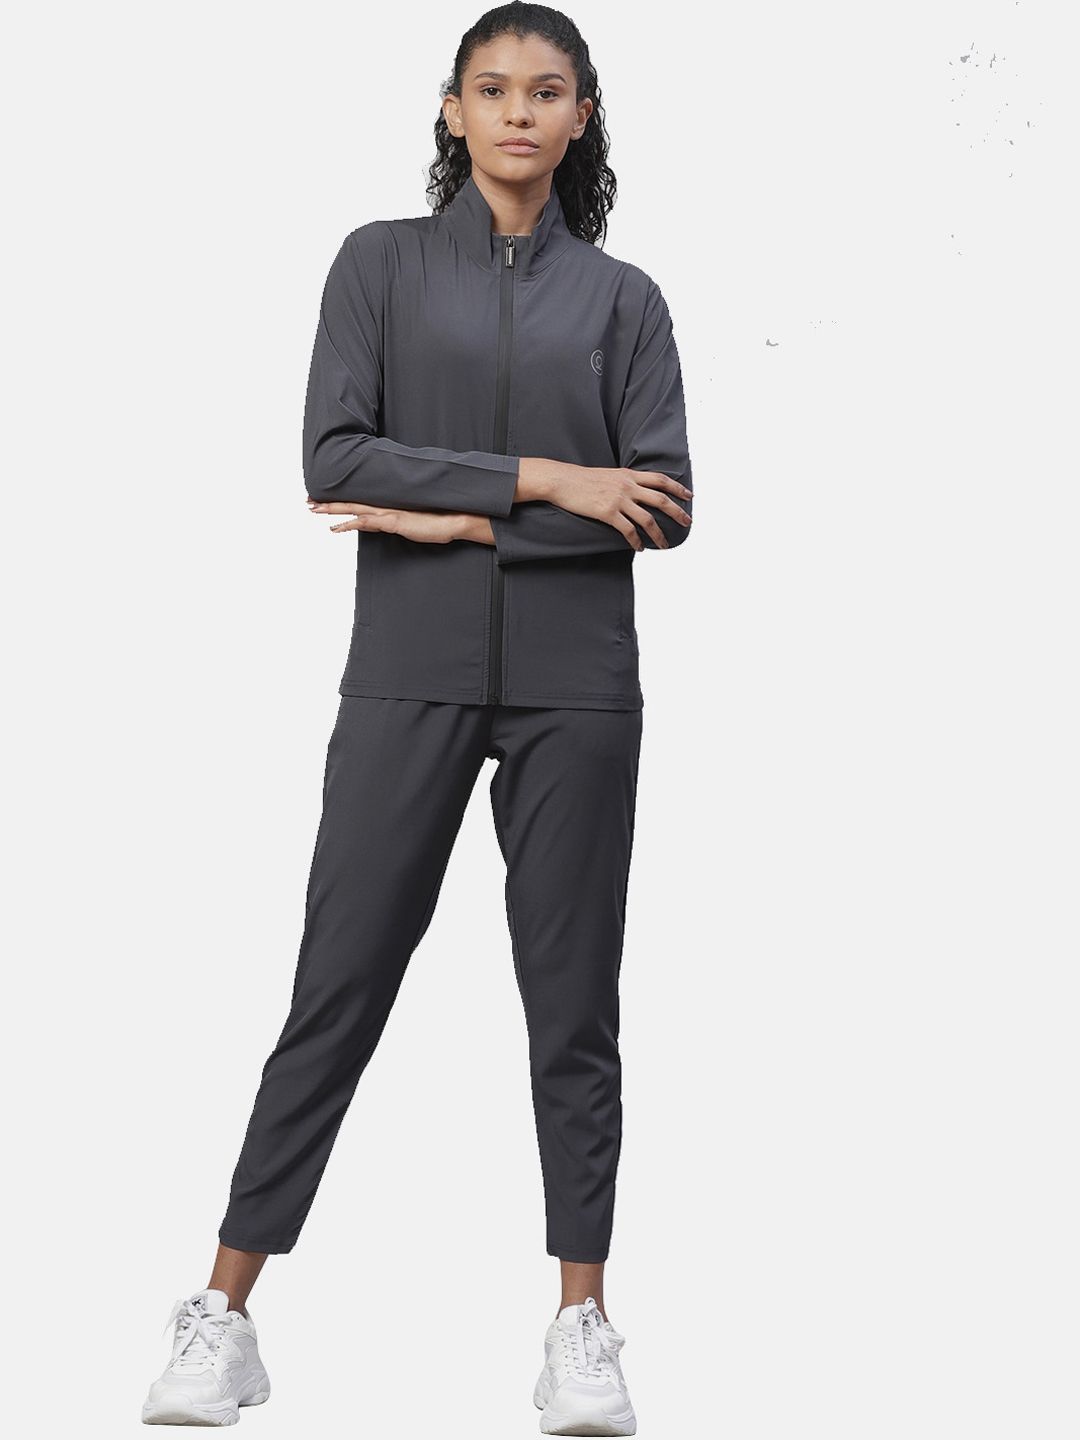 Chkokko Women Grey Solid Tracksuit Price in India